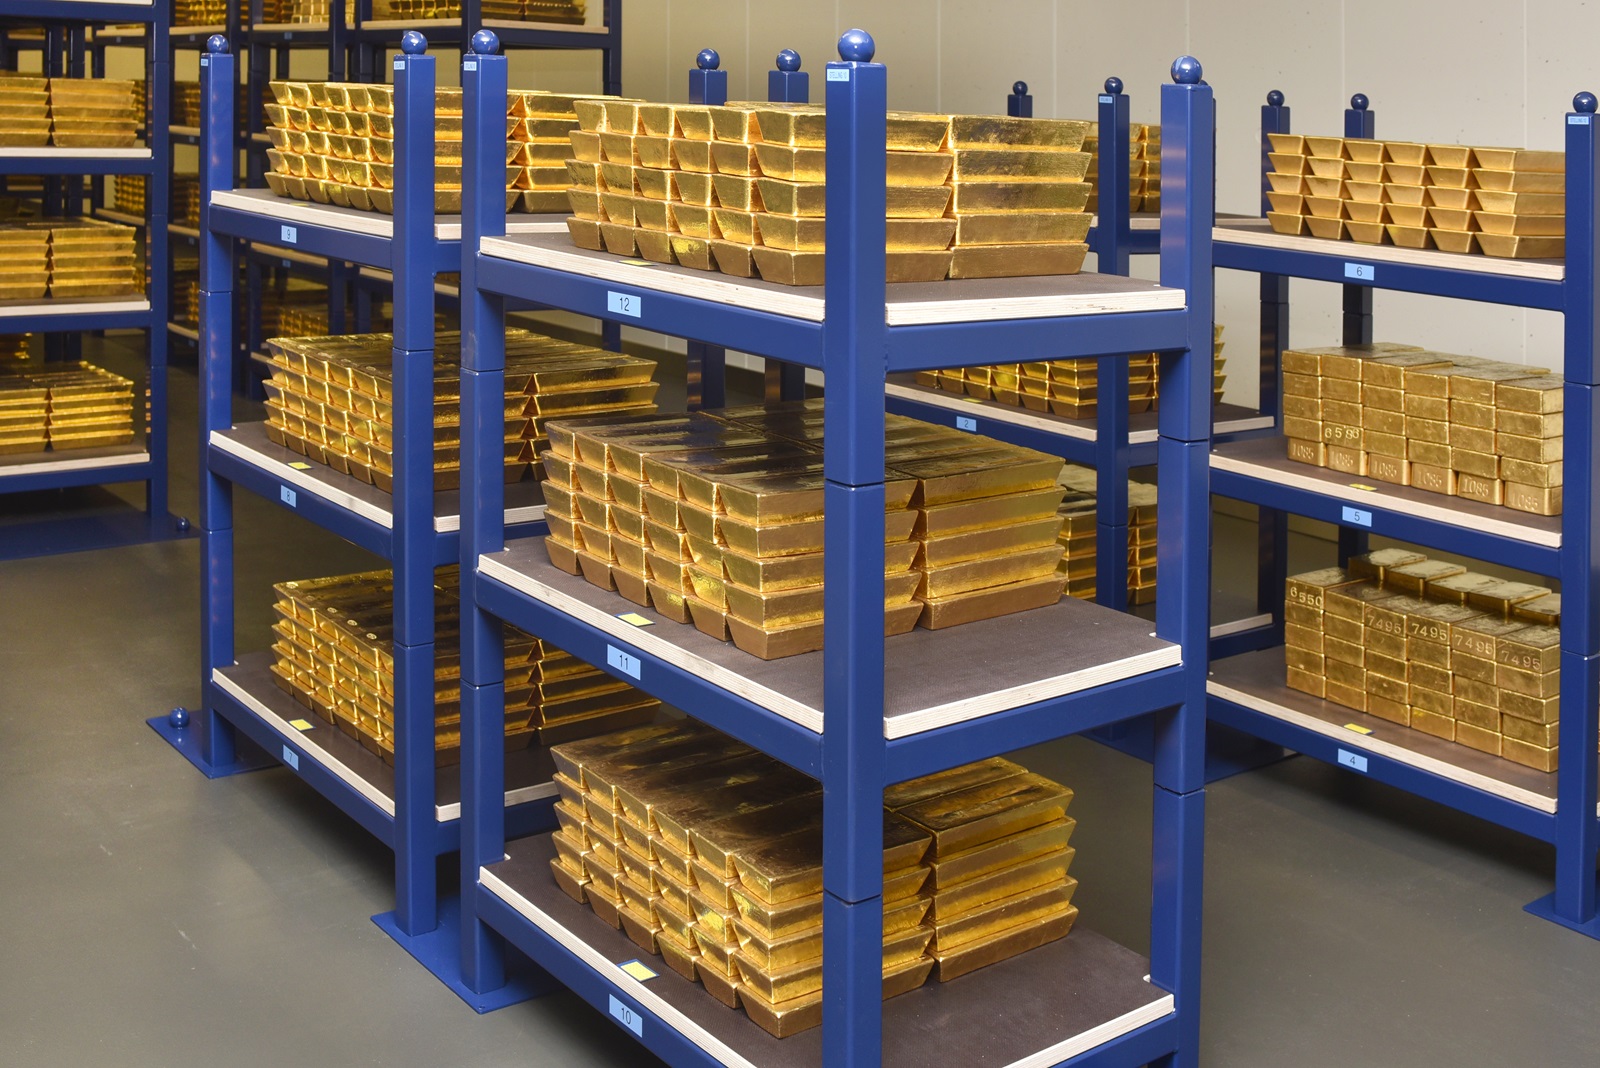 Governor of Dutch Central Bank States Gold Revaluation Account Is Solvency Backstop